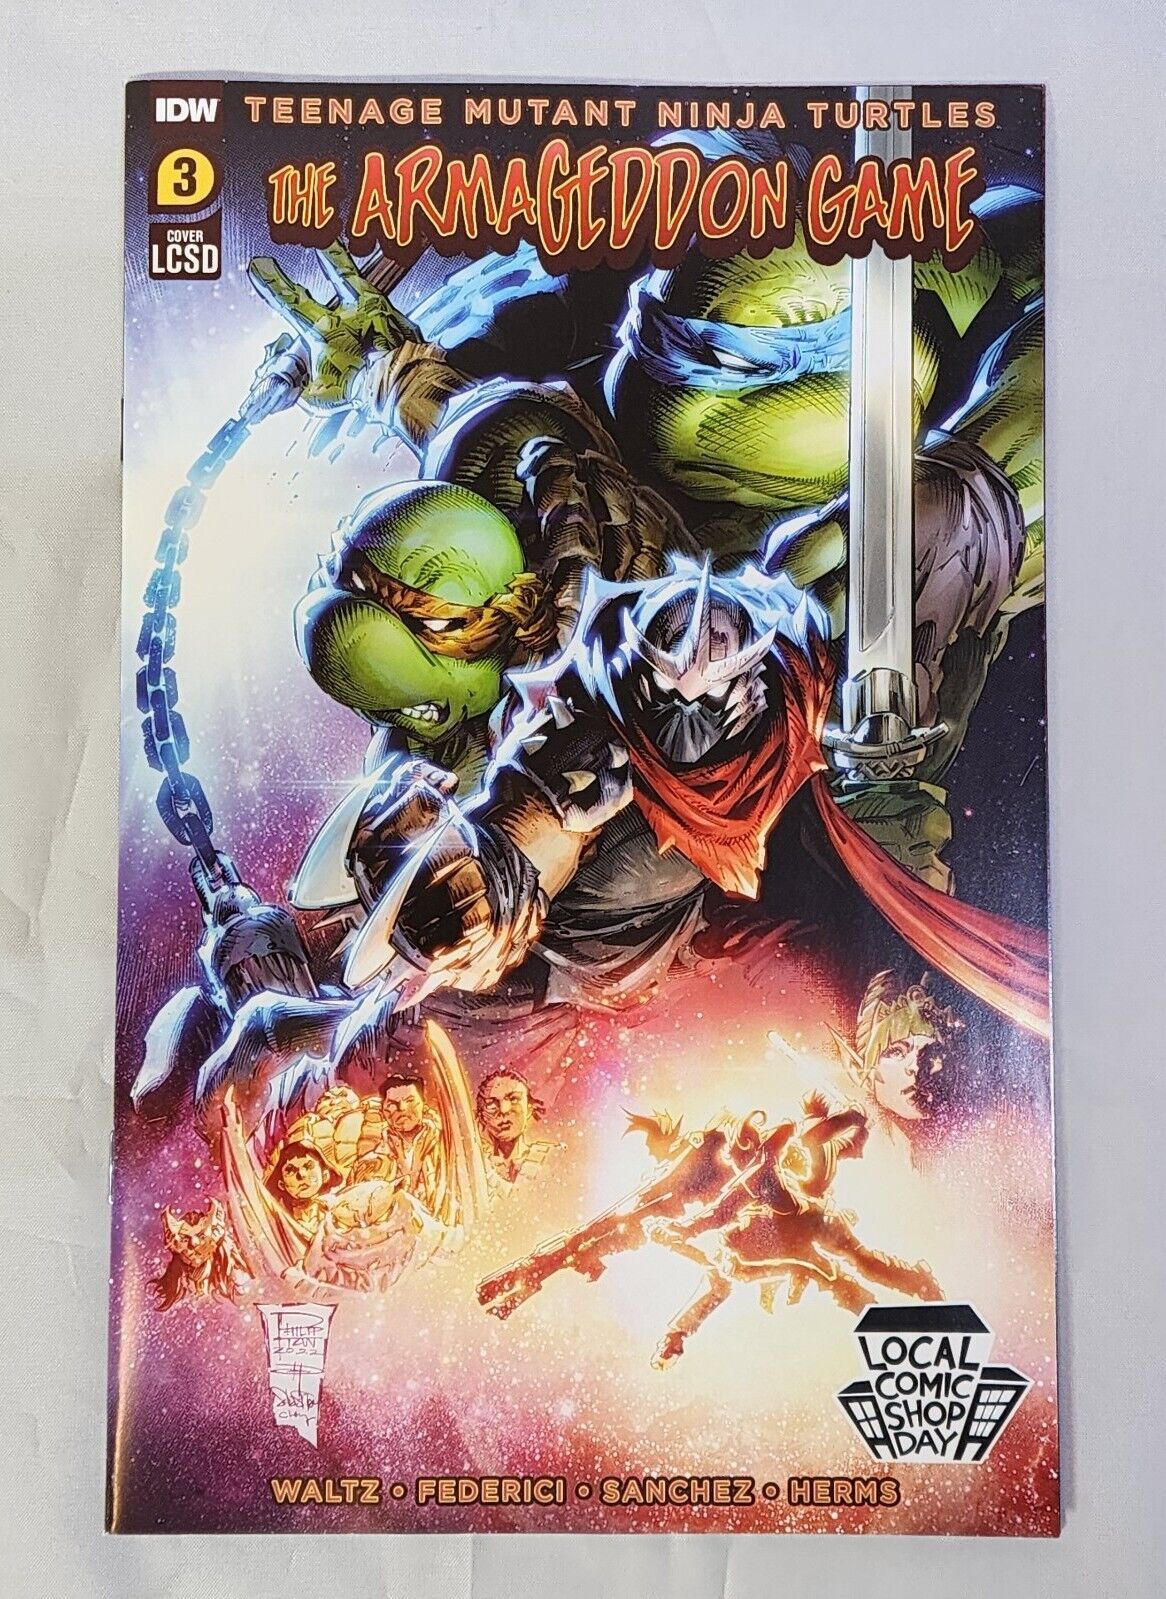 TMNT the Armageddon Game #3 2022 Unread Philip Tan LCSD Variant Cover IDW